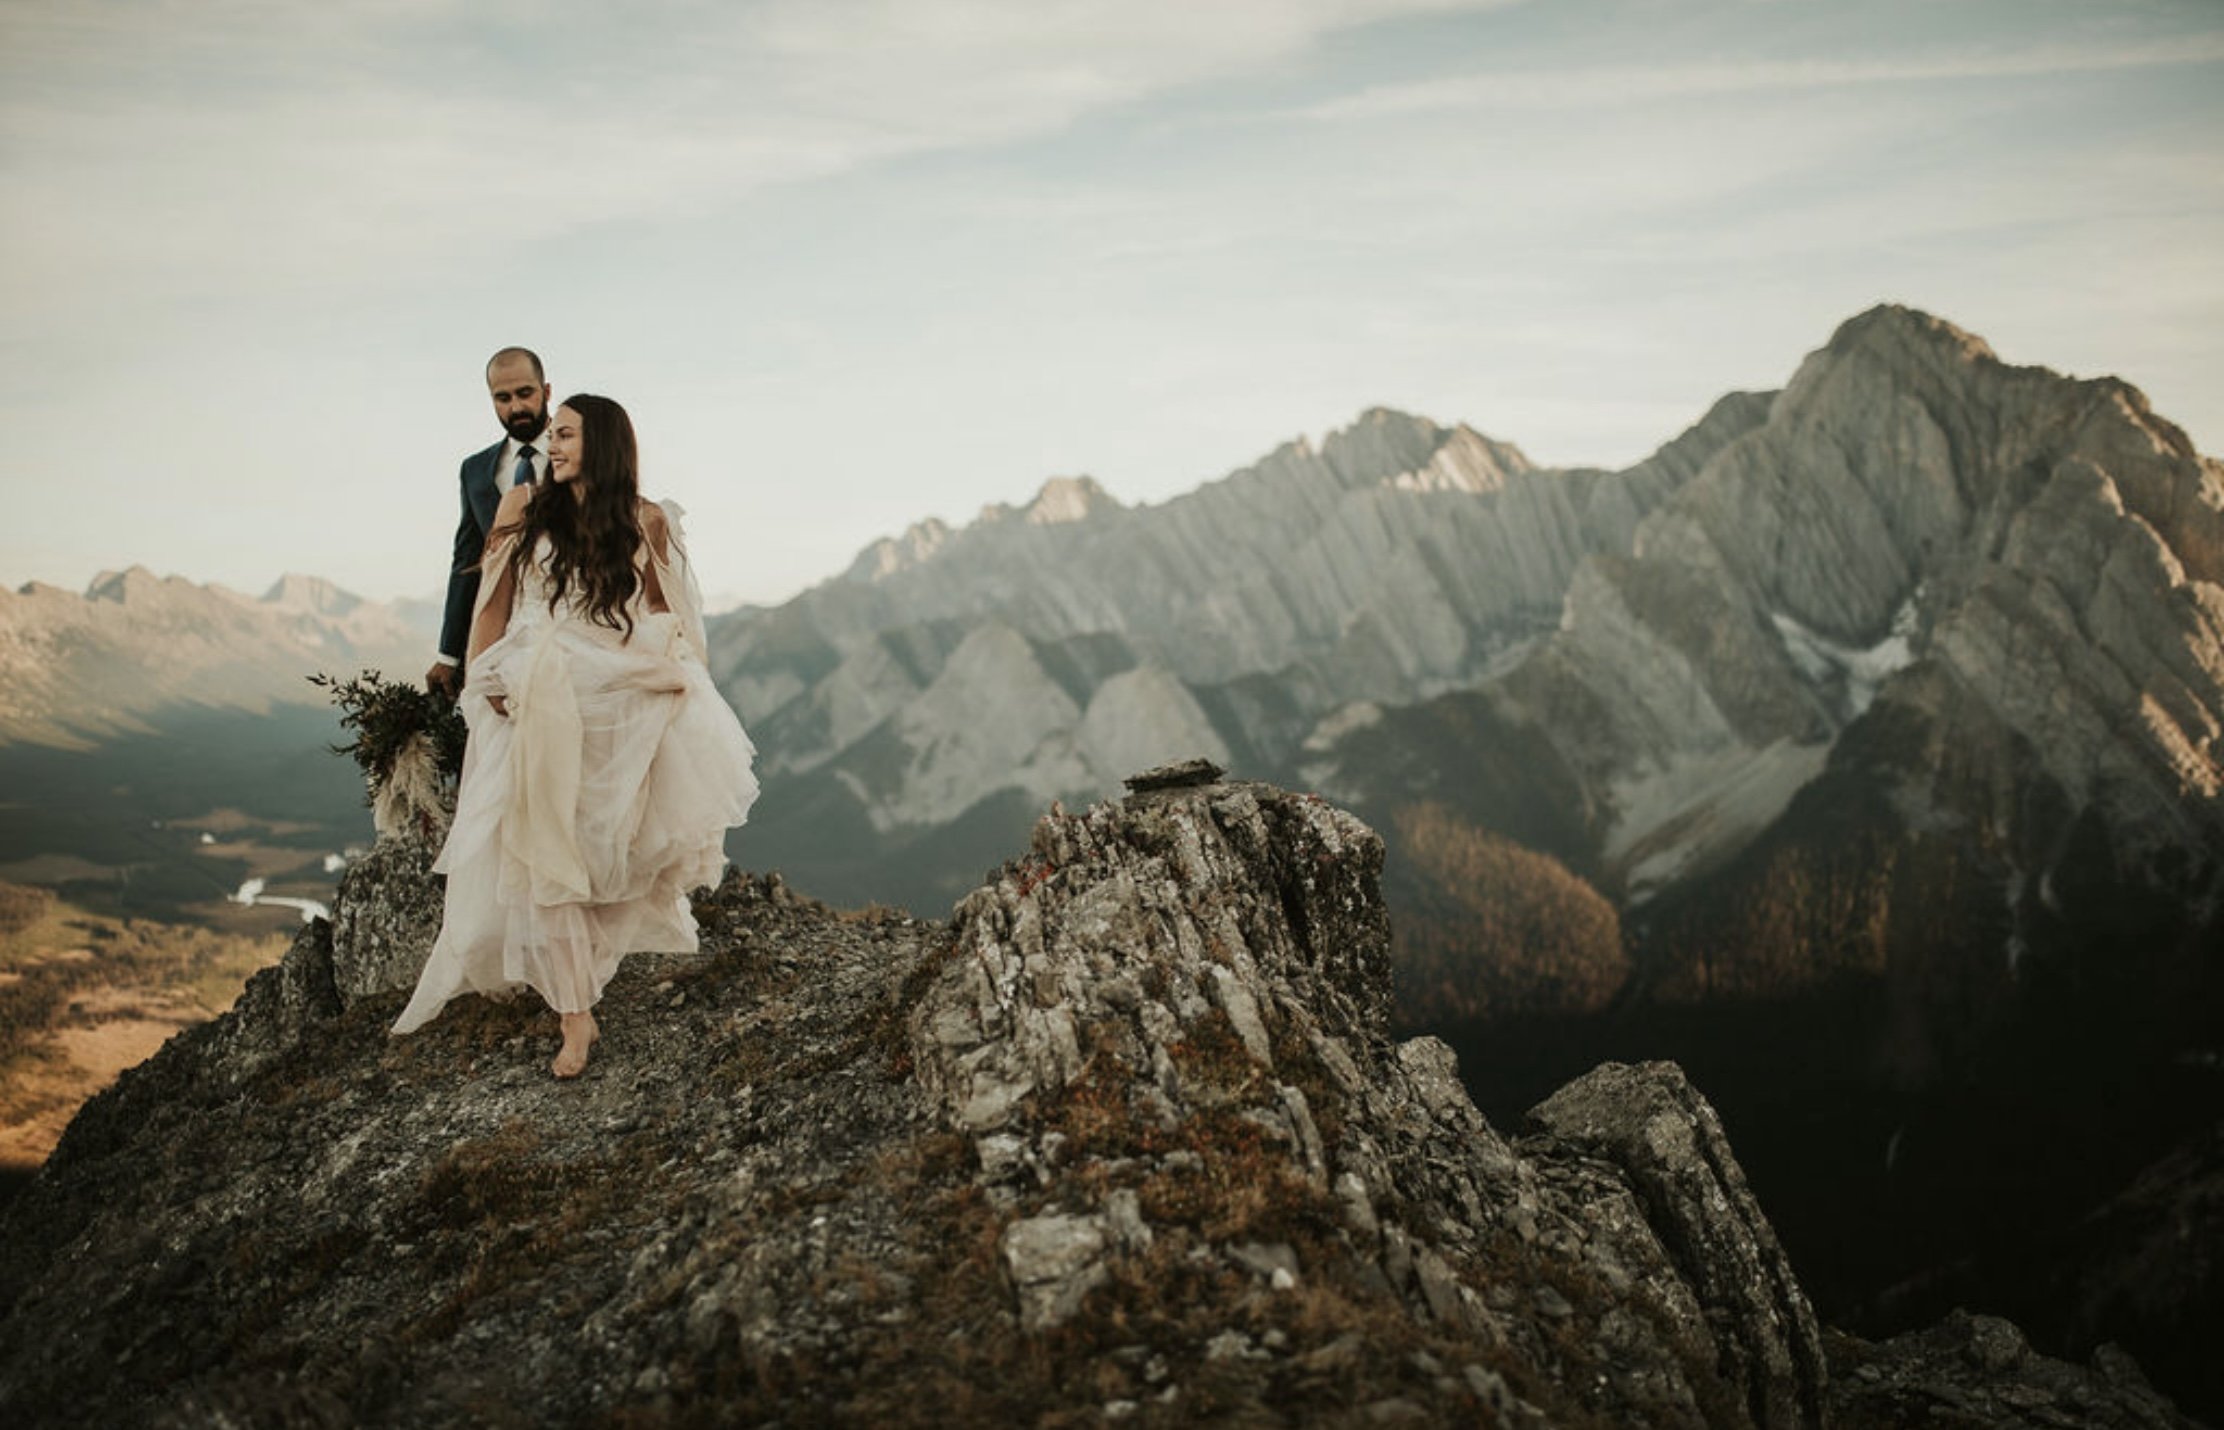   Heidi wedding dress . Elopement in the Rocky Mountains, Canada. Photo by  Neil Slattery Photography.   